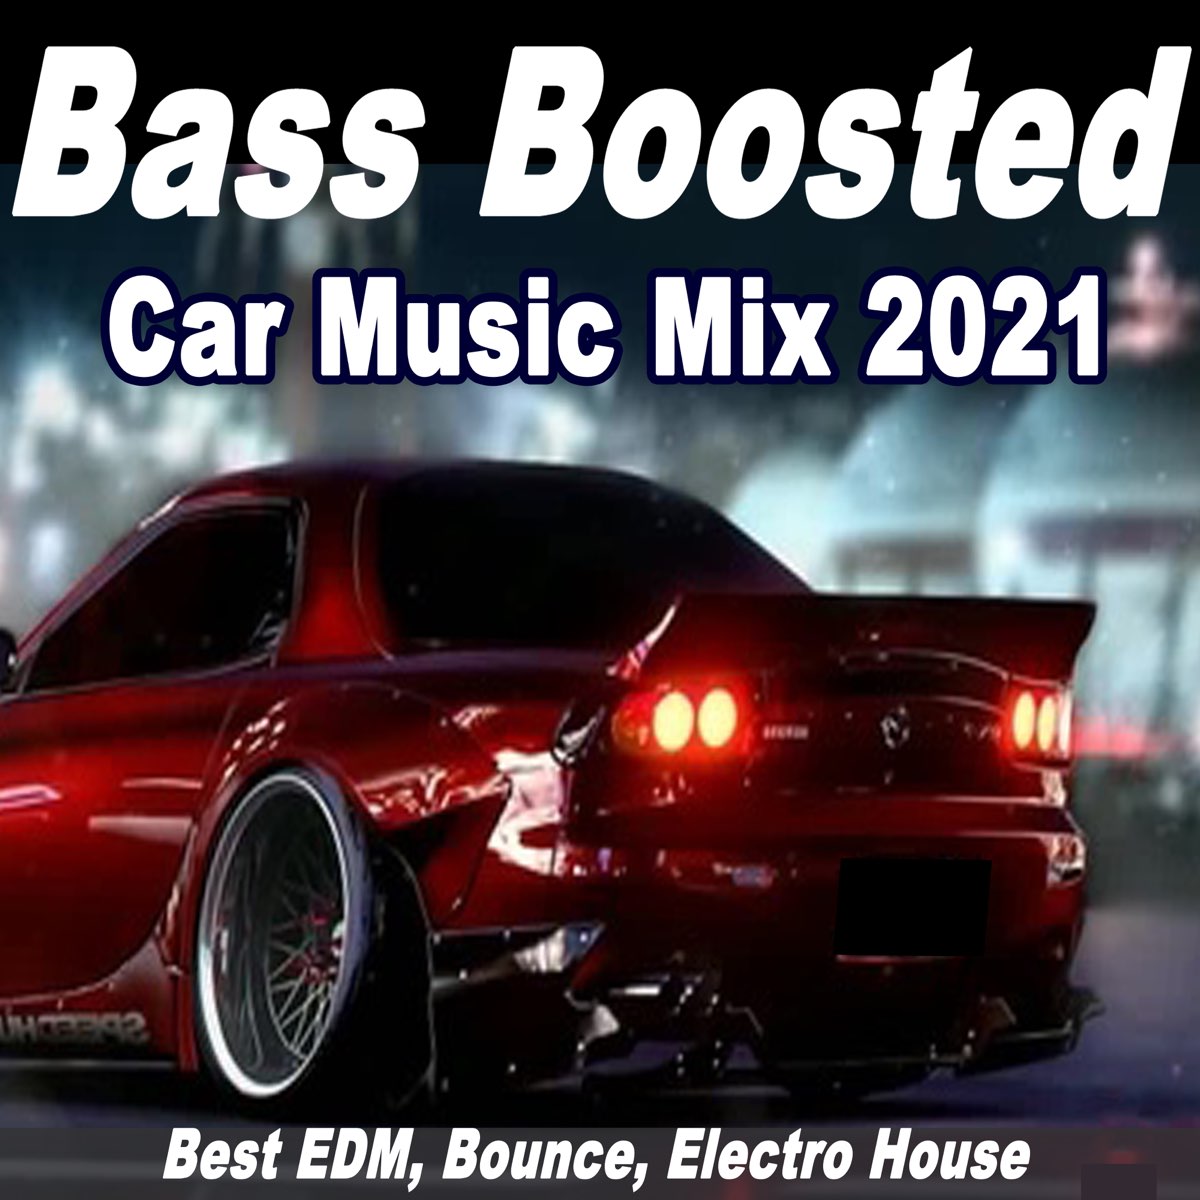 Bass Boosted Car Music Mix 2021 (Best EDM, Bounce, Electro House) - Album  by Various Artists - Apple Music